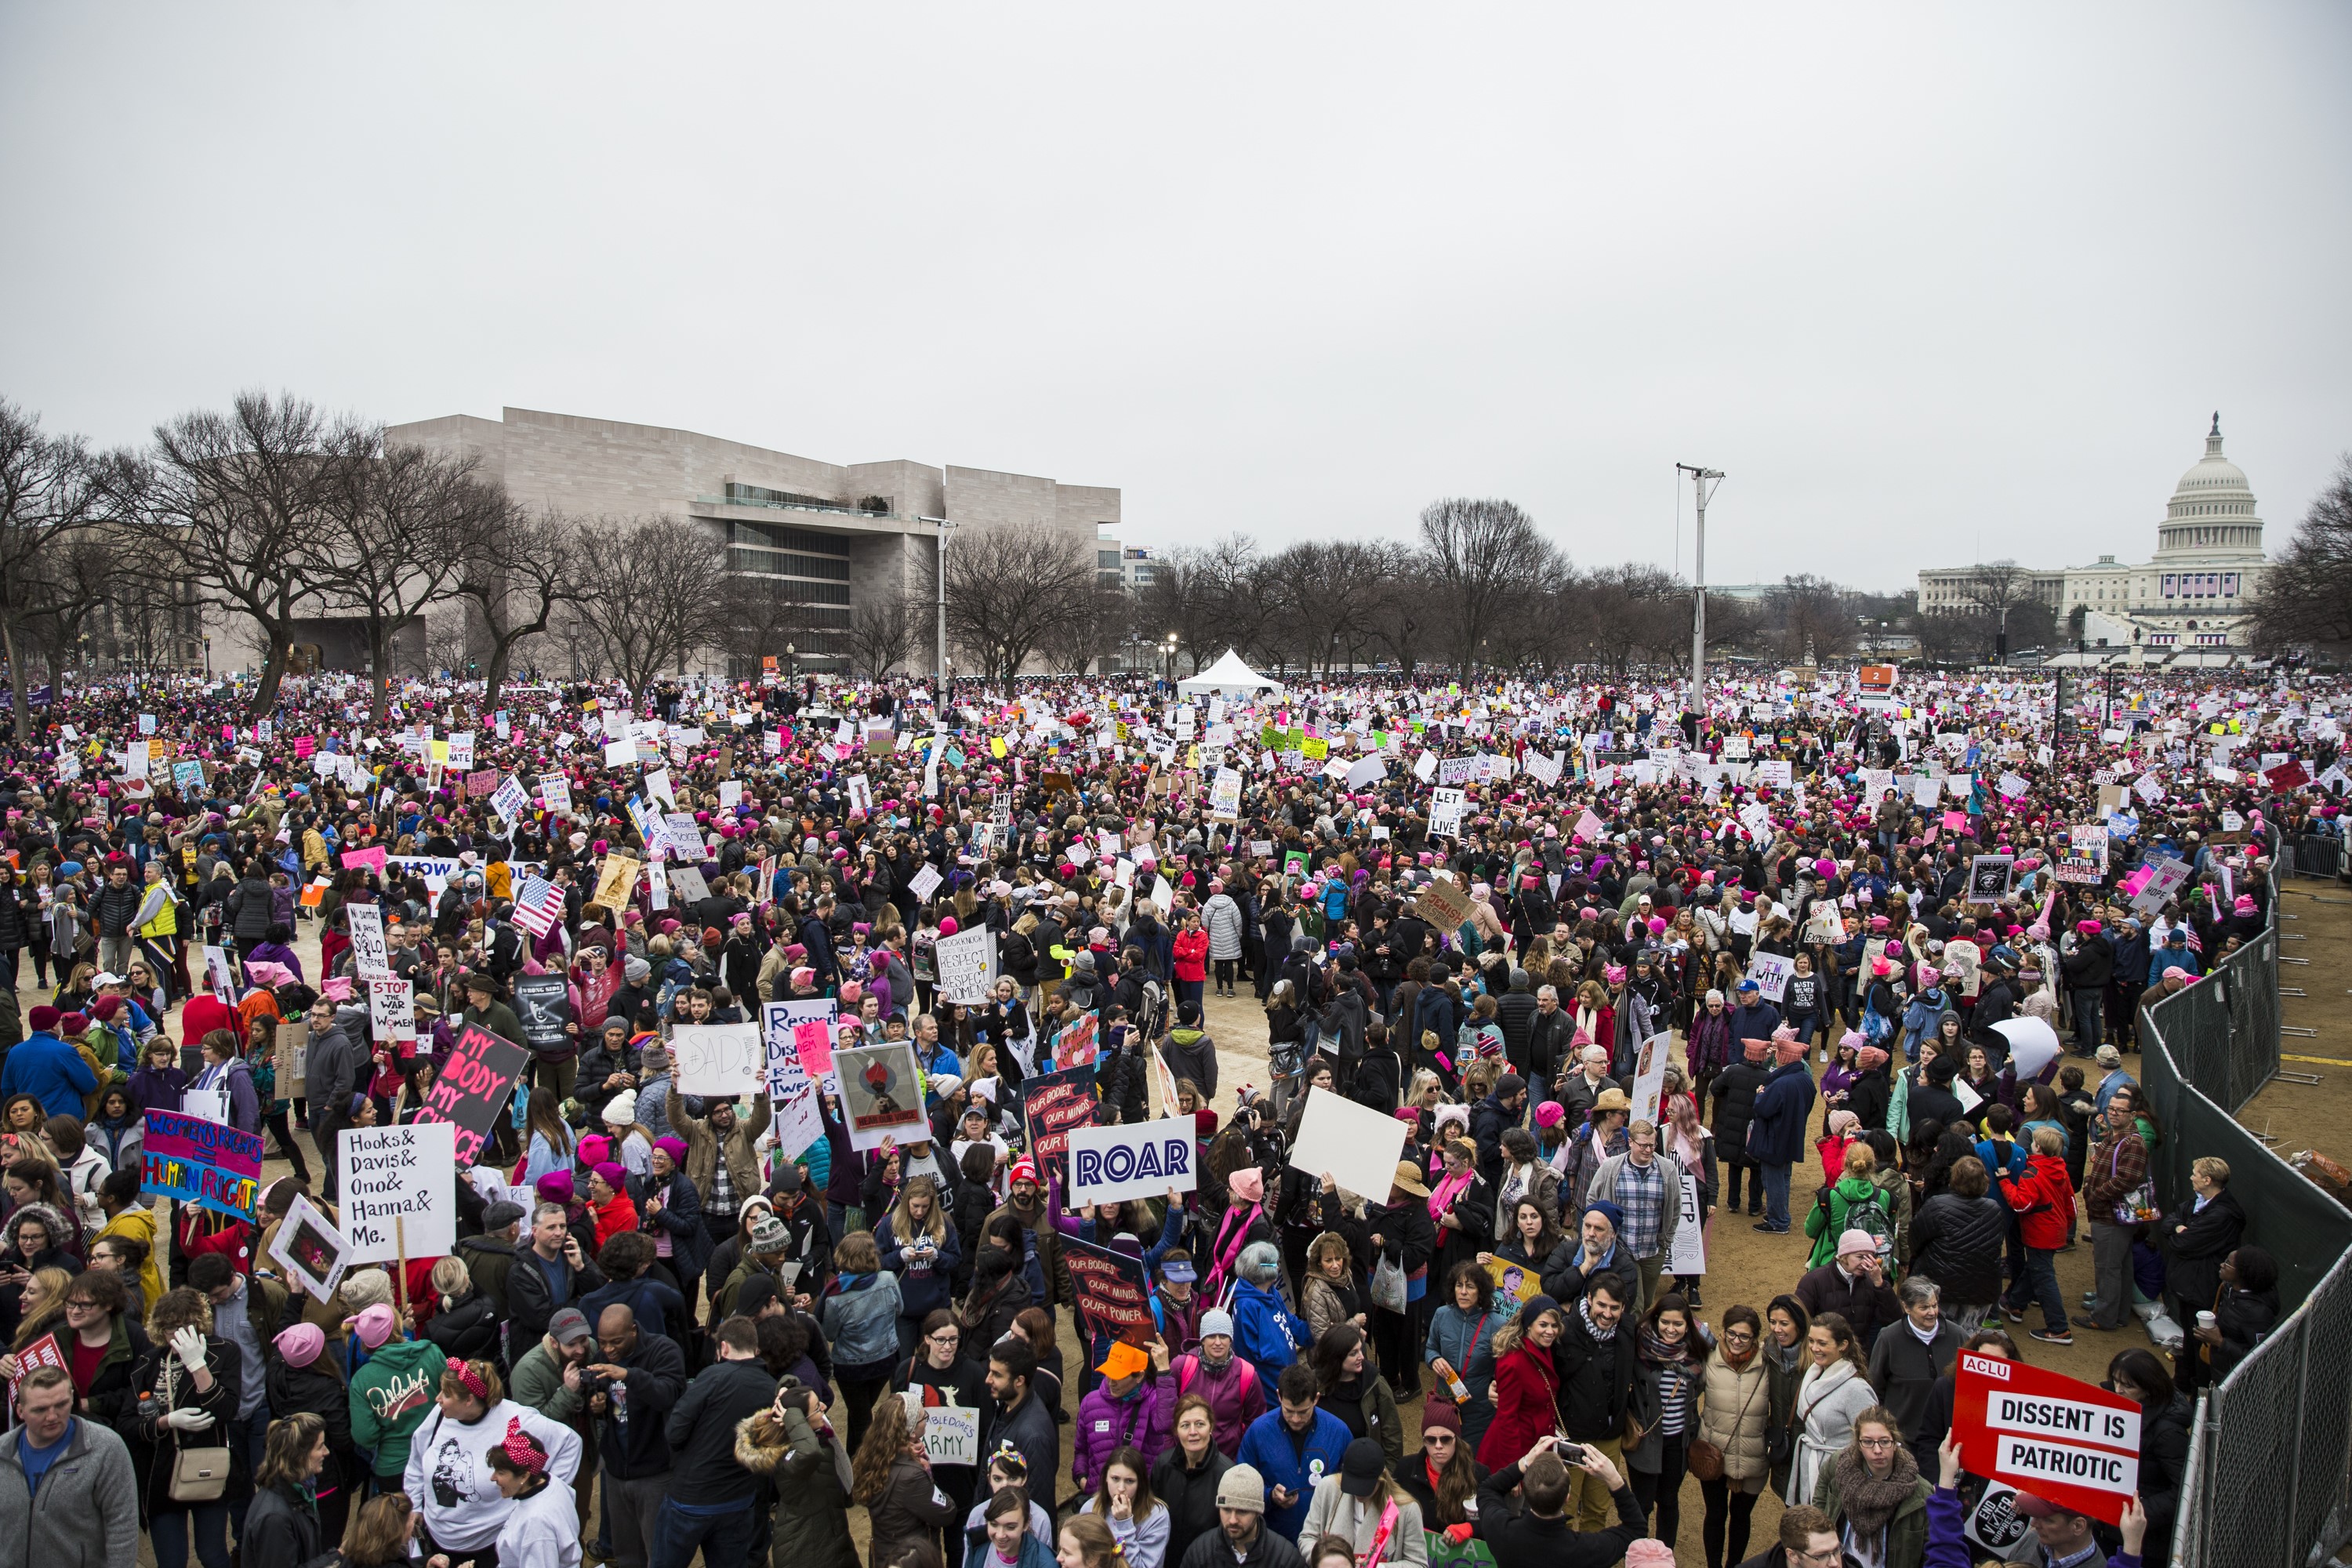 Protesters attend the Women's March to protest President Donald Trump in Washington D.C. on Jan. 21, 2017. (Samuel Corum—Anadolu Agency/Getty Images)